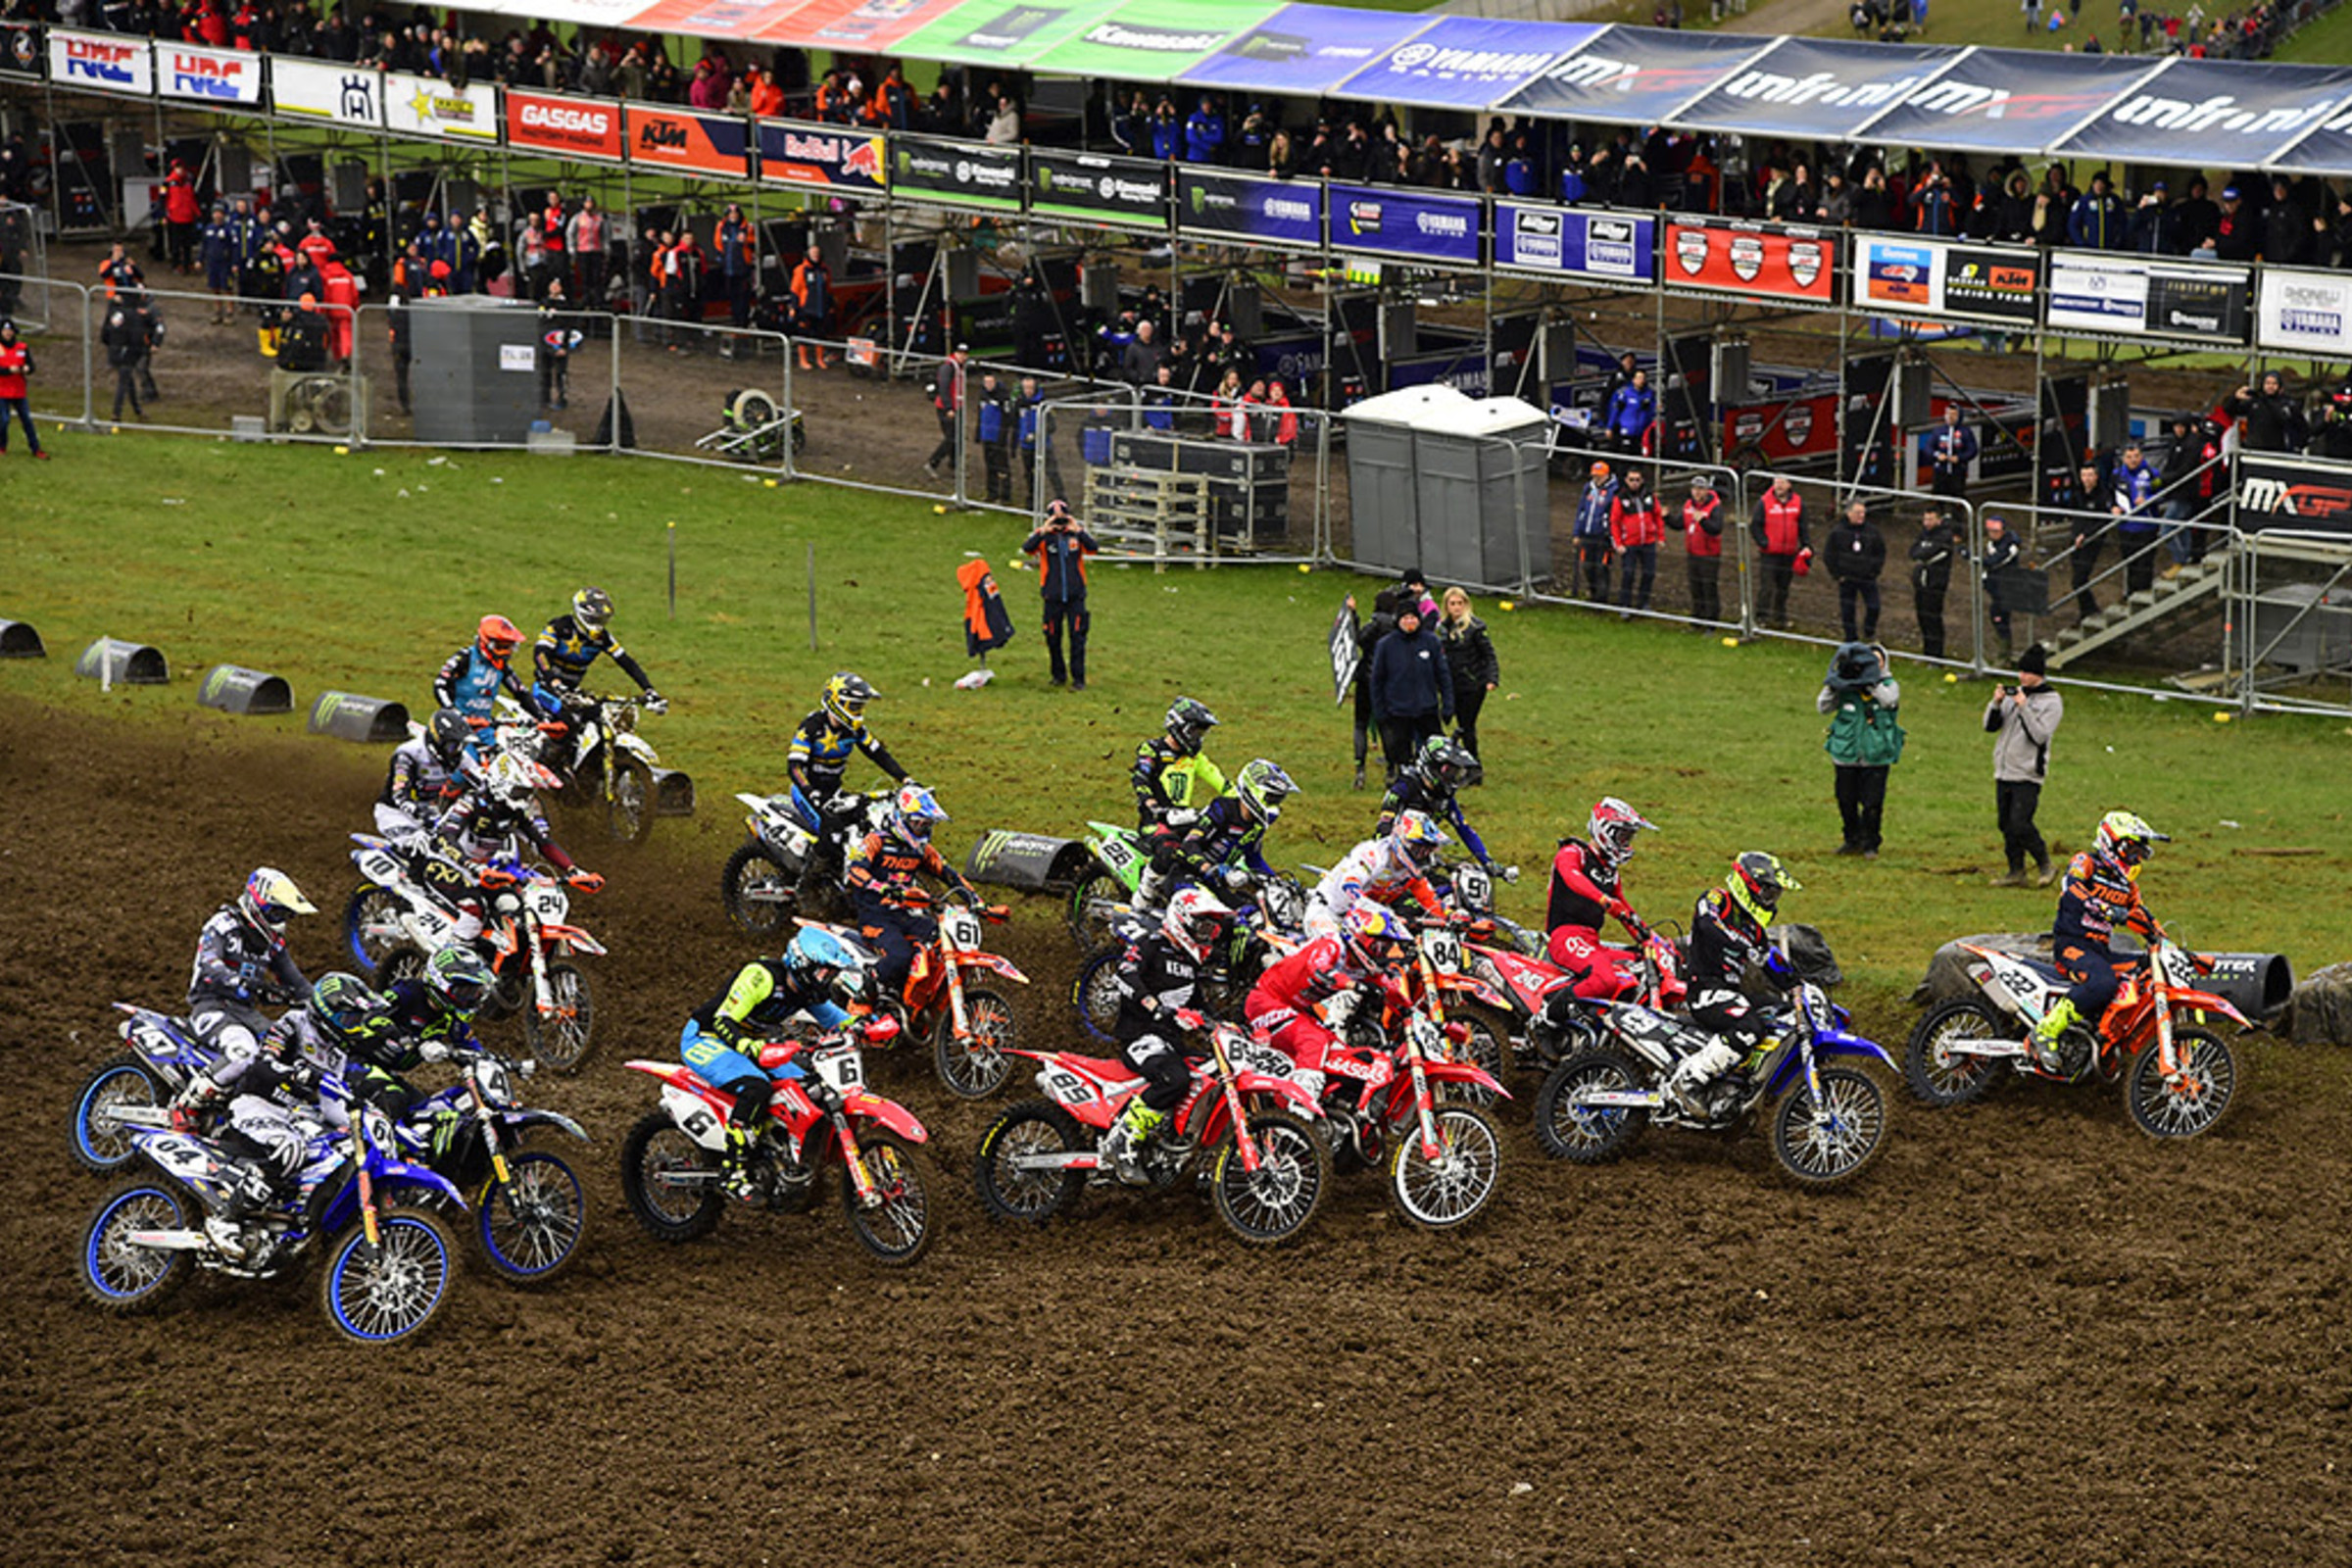 2021 MXGP of Great Britain Race Preview